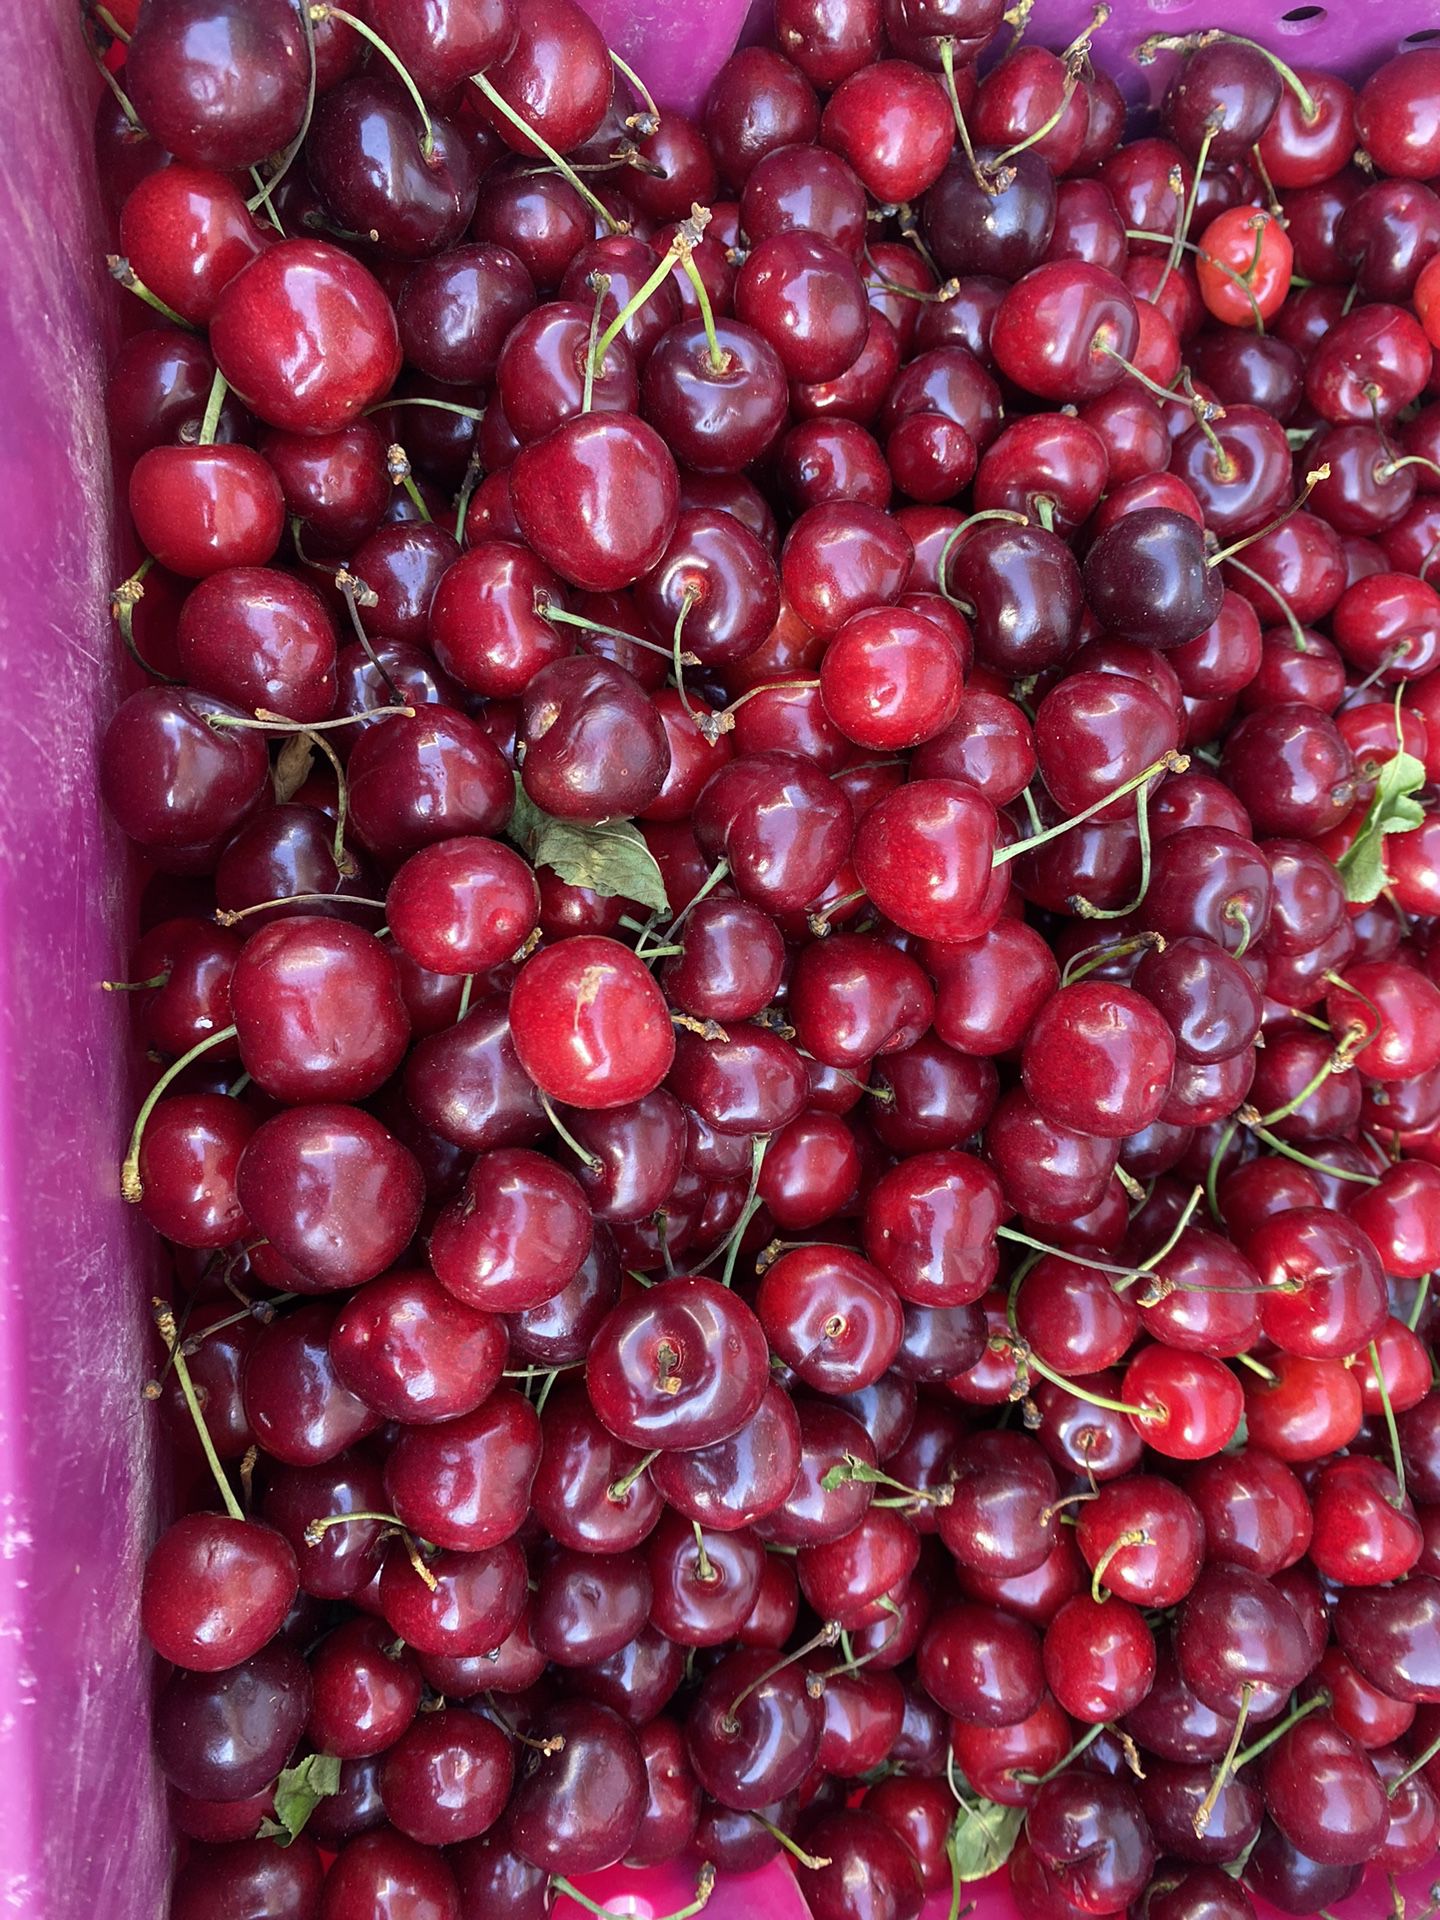 Cherries 🍒 $3 a lb OR 3lbs for $8